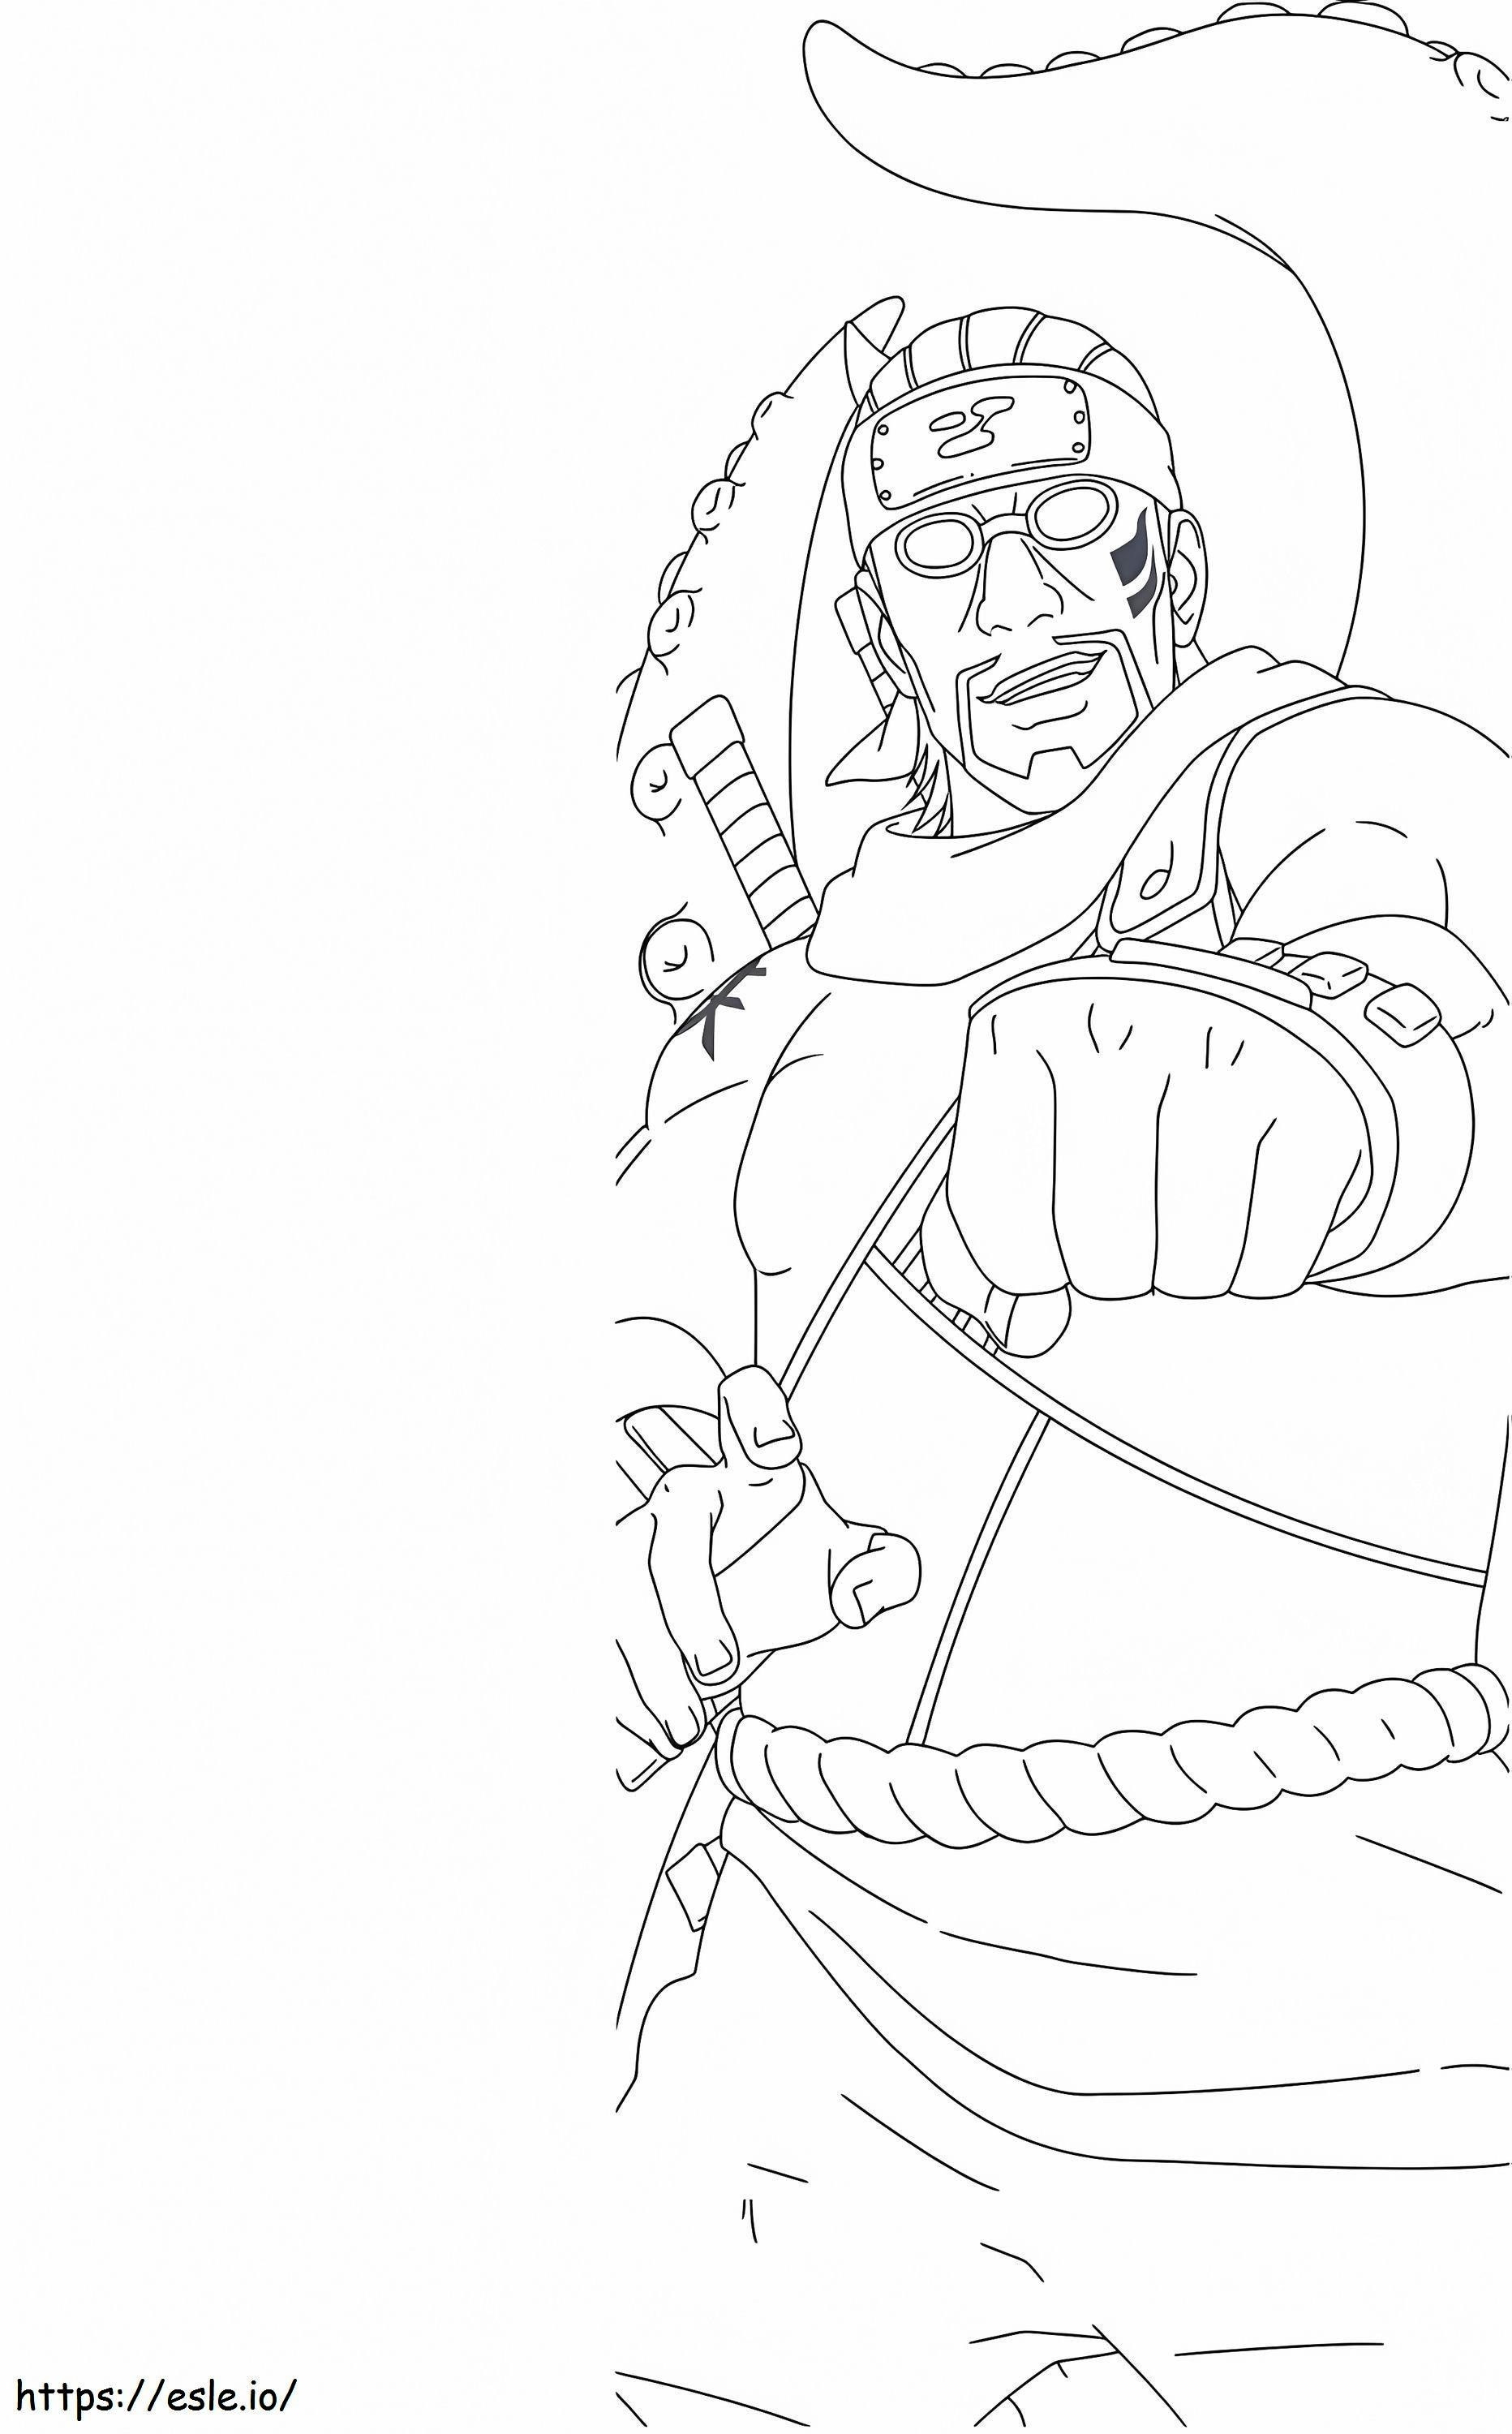 1561623248_Killer B A4 coloring page